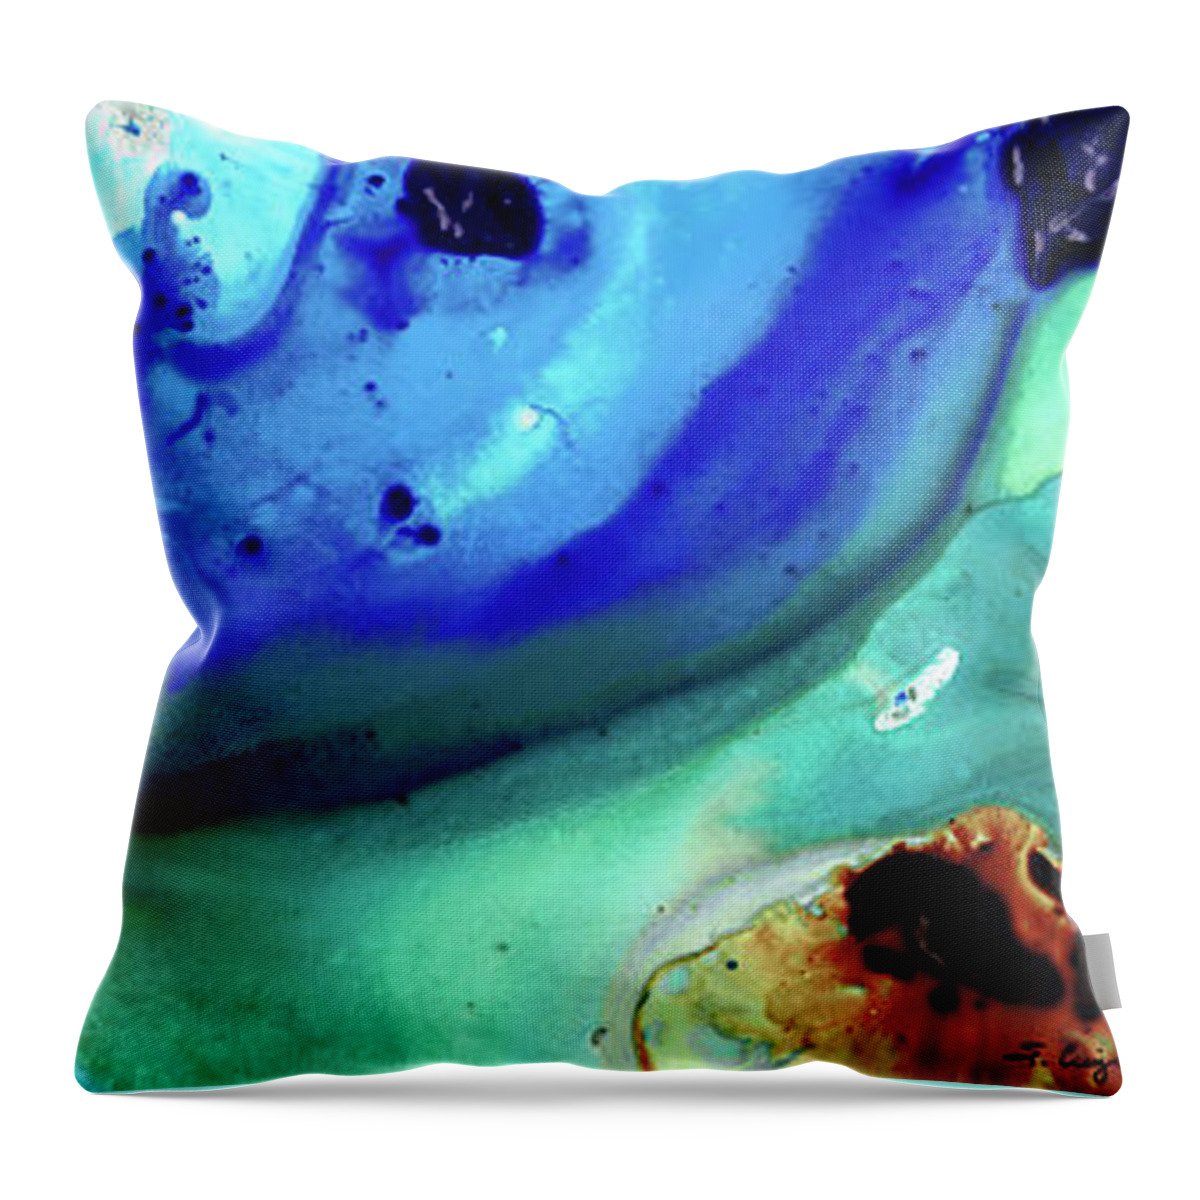 Abstract Art Throw Pillow featuring the painting Abstract Art - Making Waves - Sharon Cummings by Sharon Cummings